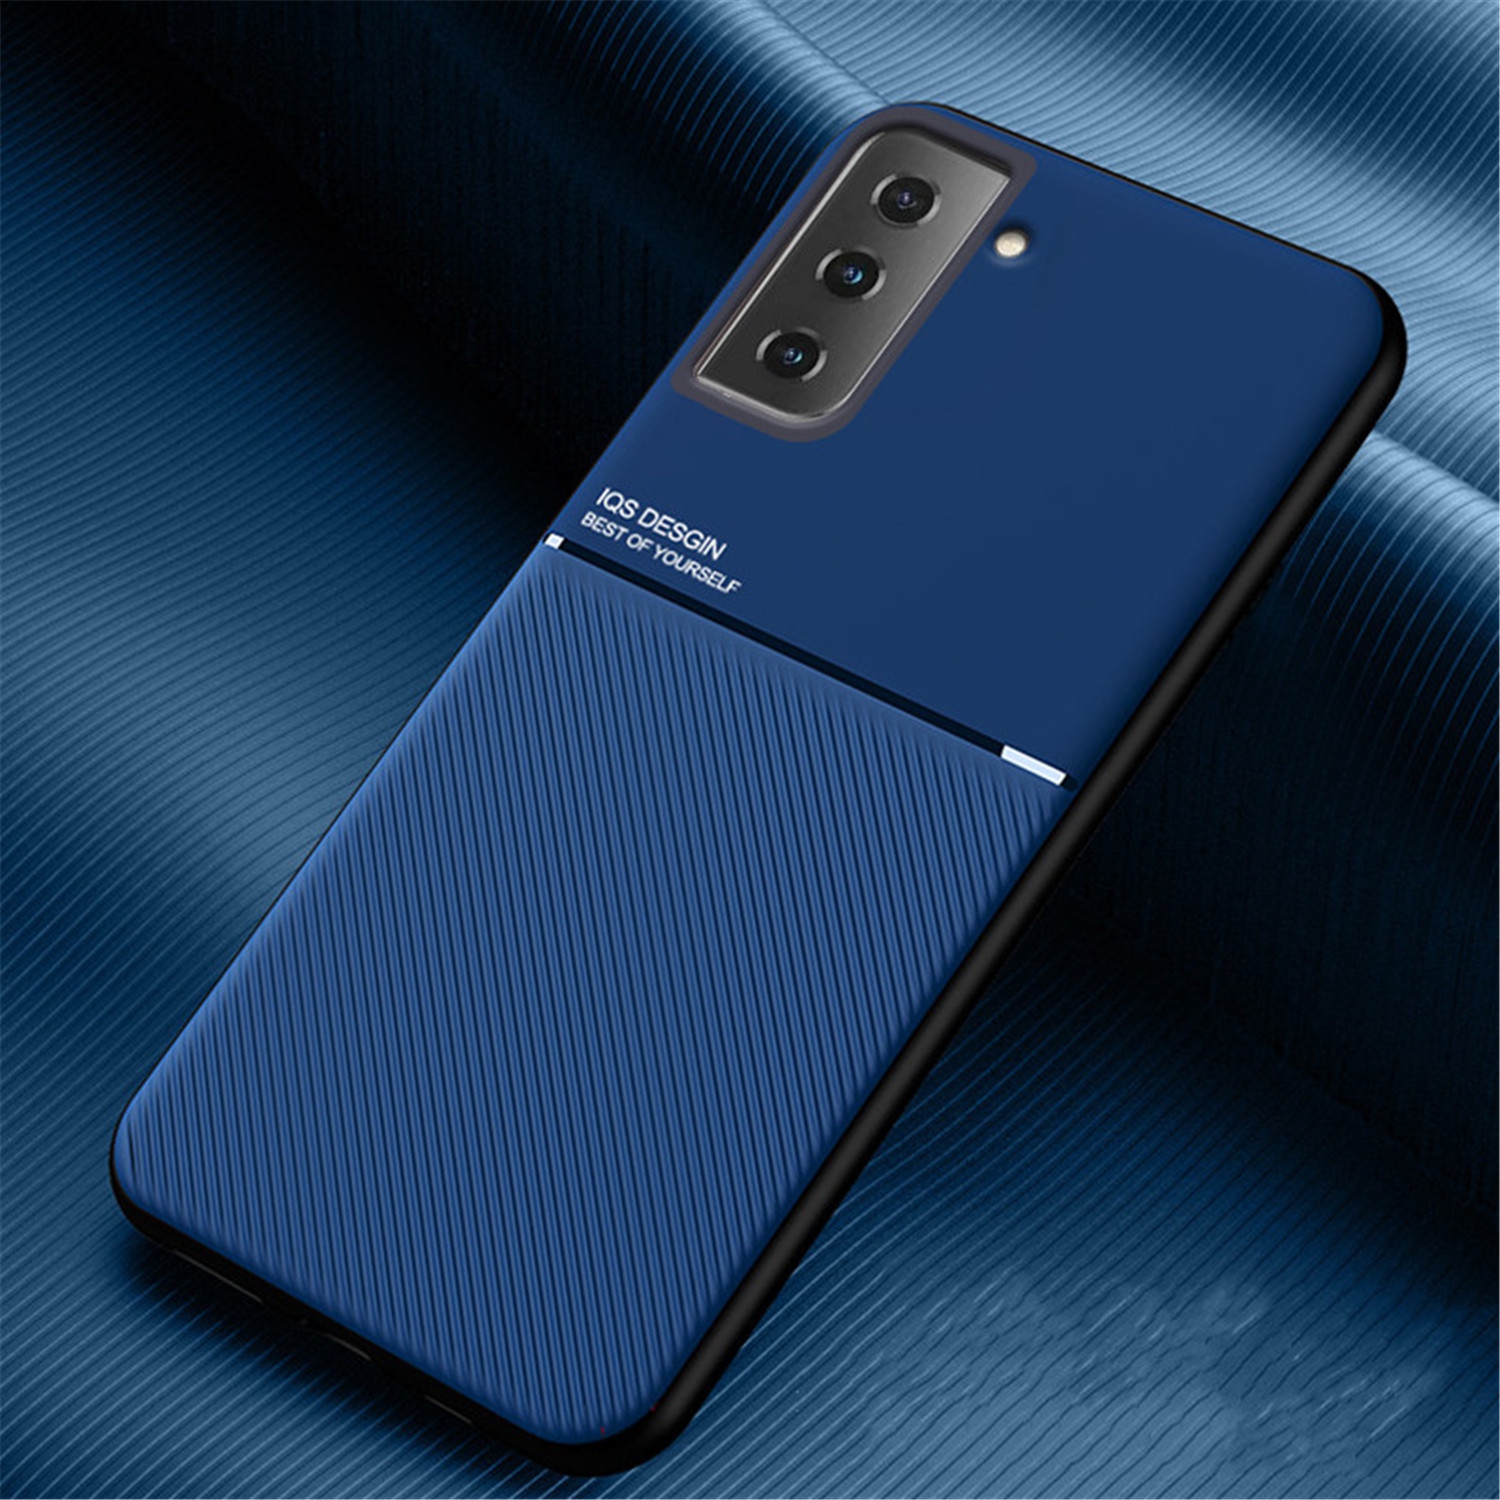 Kelvin Leather Magnetic Texture Slim Matte Back Phone Cove Anti Fall Frosted Stripe Cases For Samsunf Galaxy S21 FE -Blue (FREE SHIPPING)